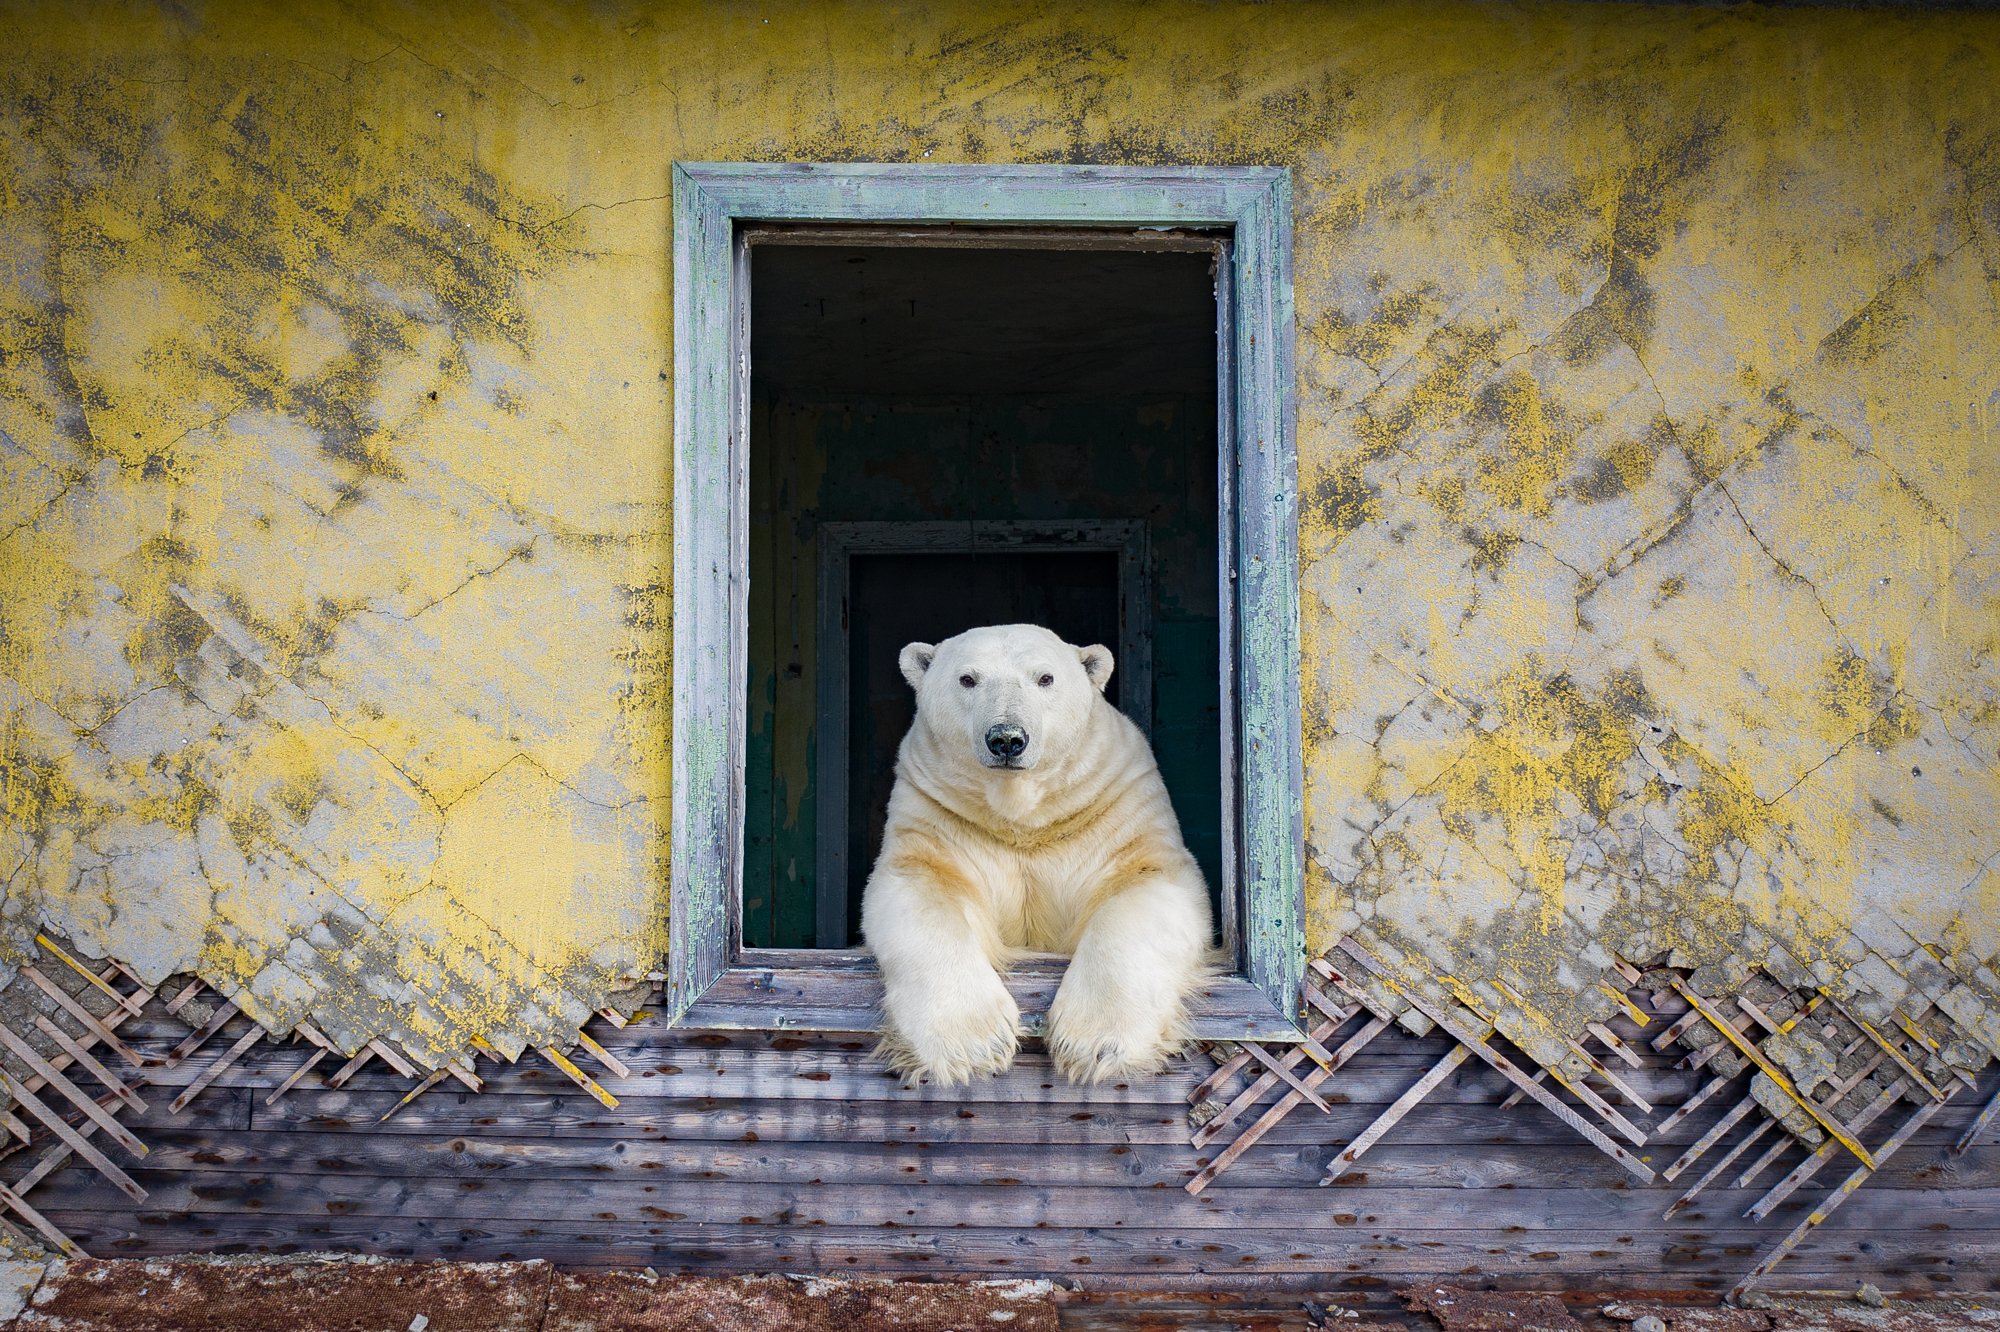 Polar bears took over an abandoned island and moved into empty houses BGR